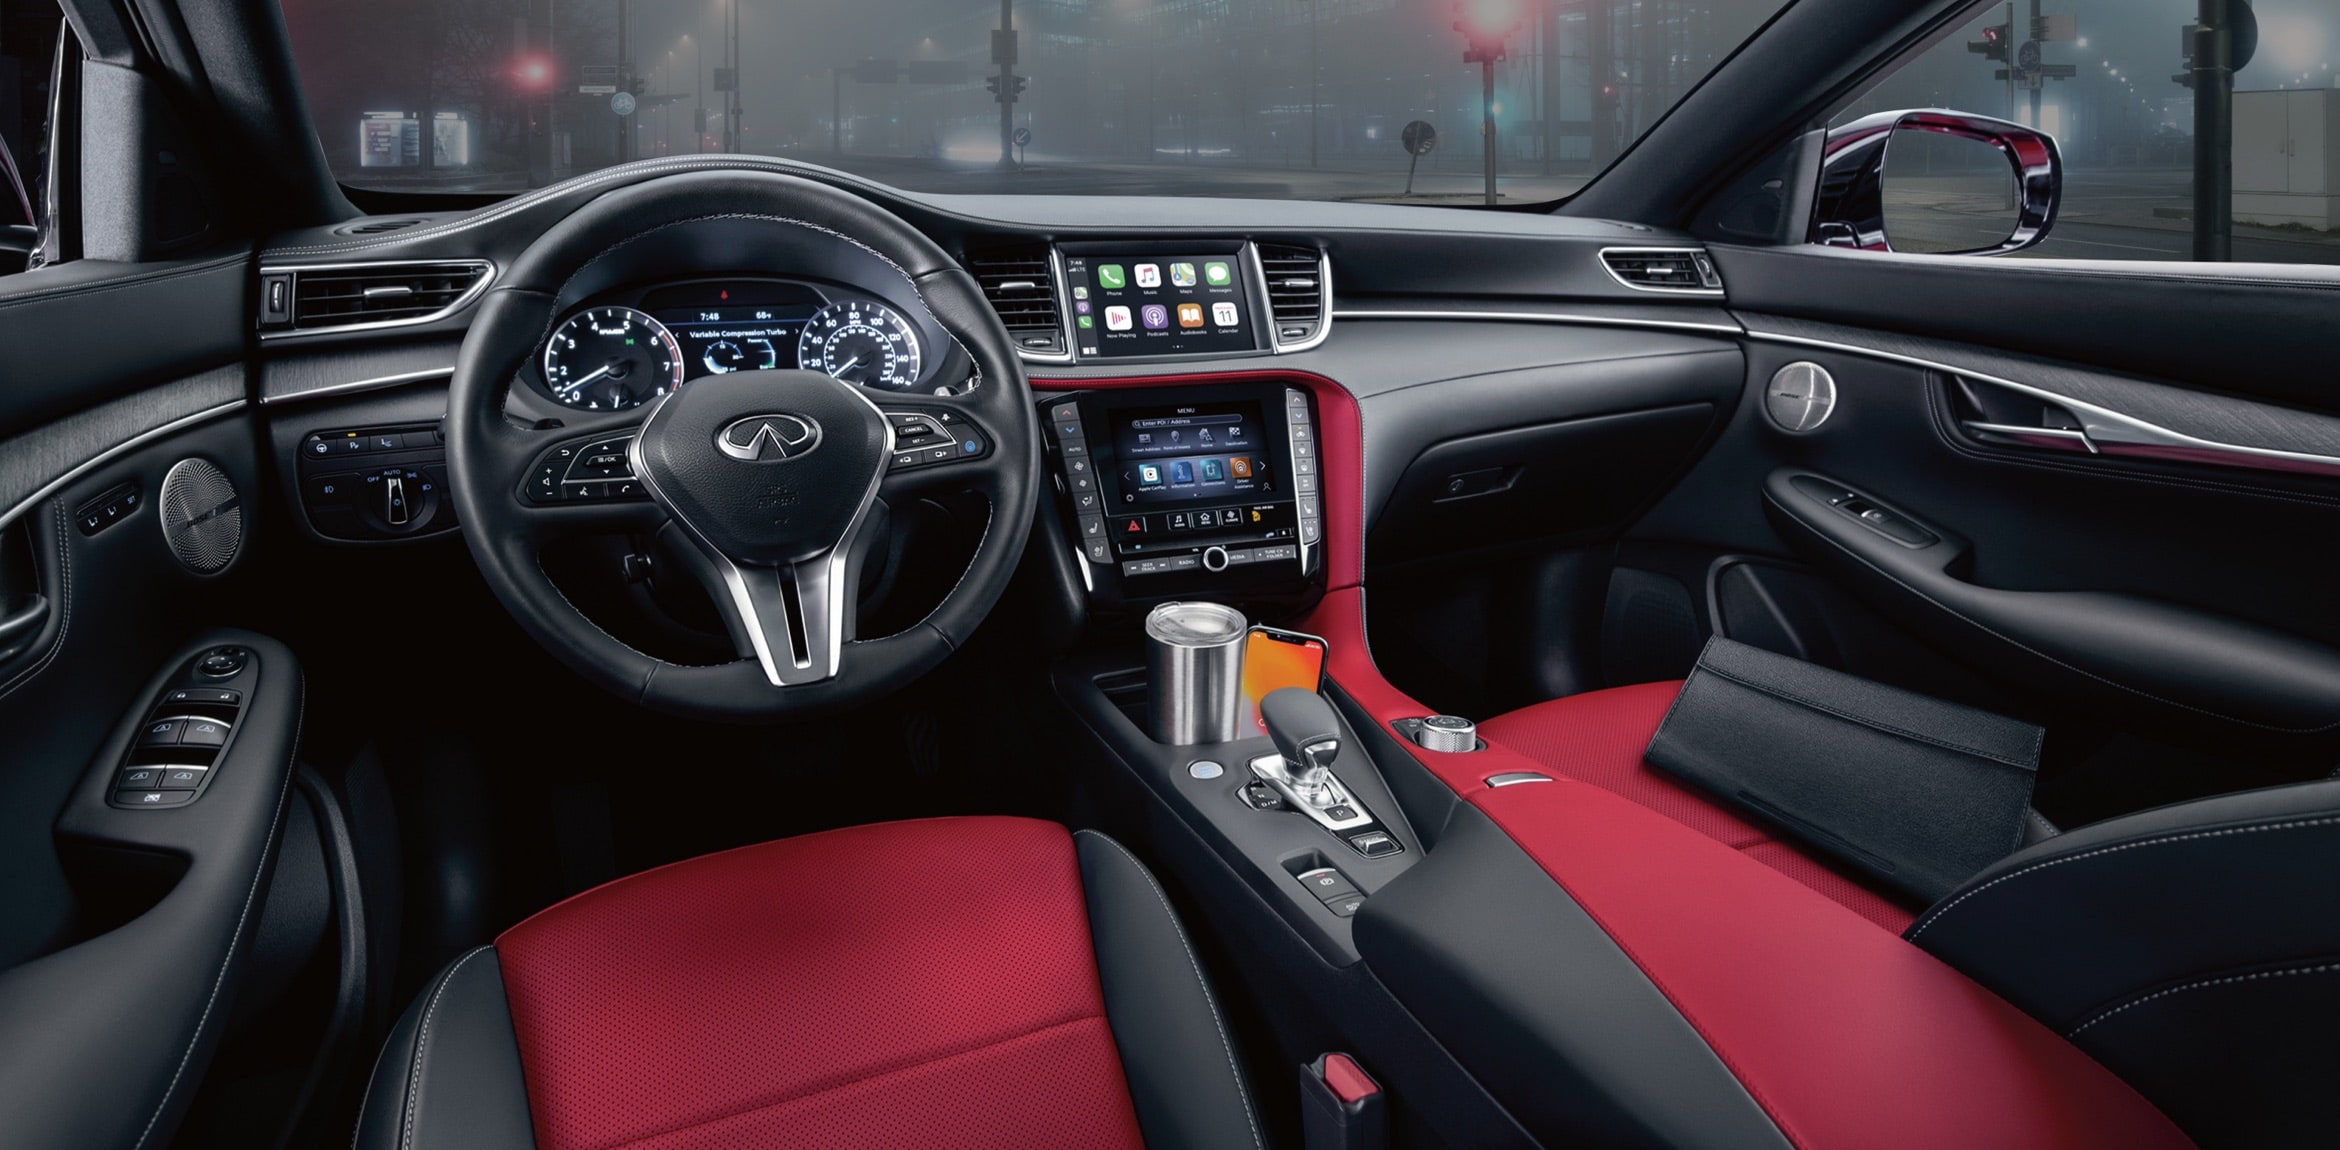 2023 INFINITI QX55 interior highlighting front seats and driver console